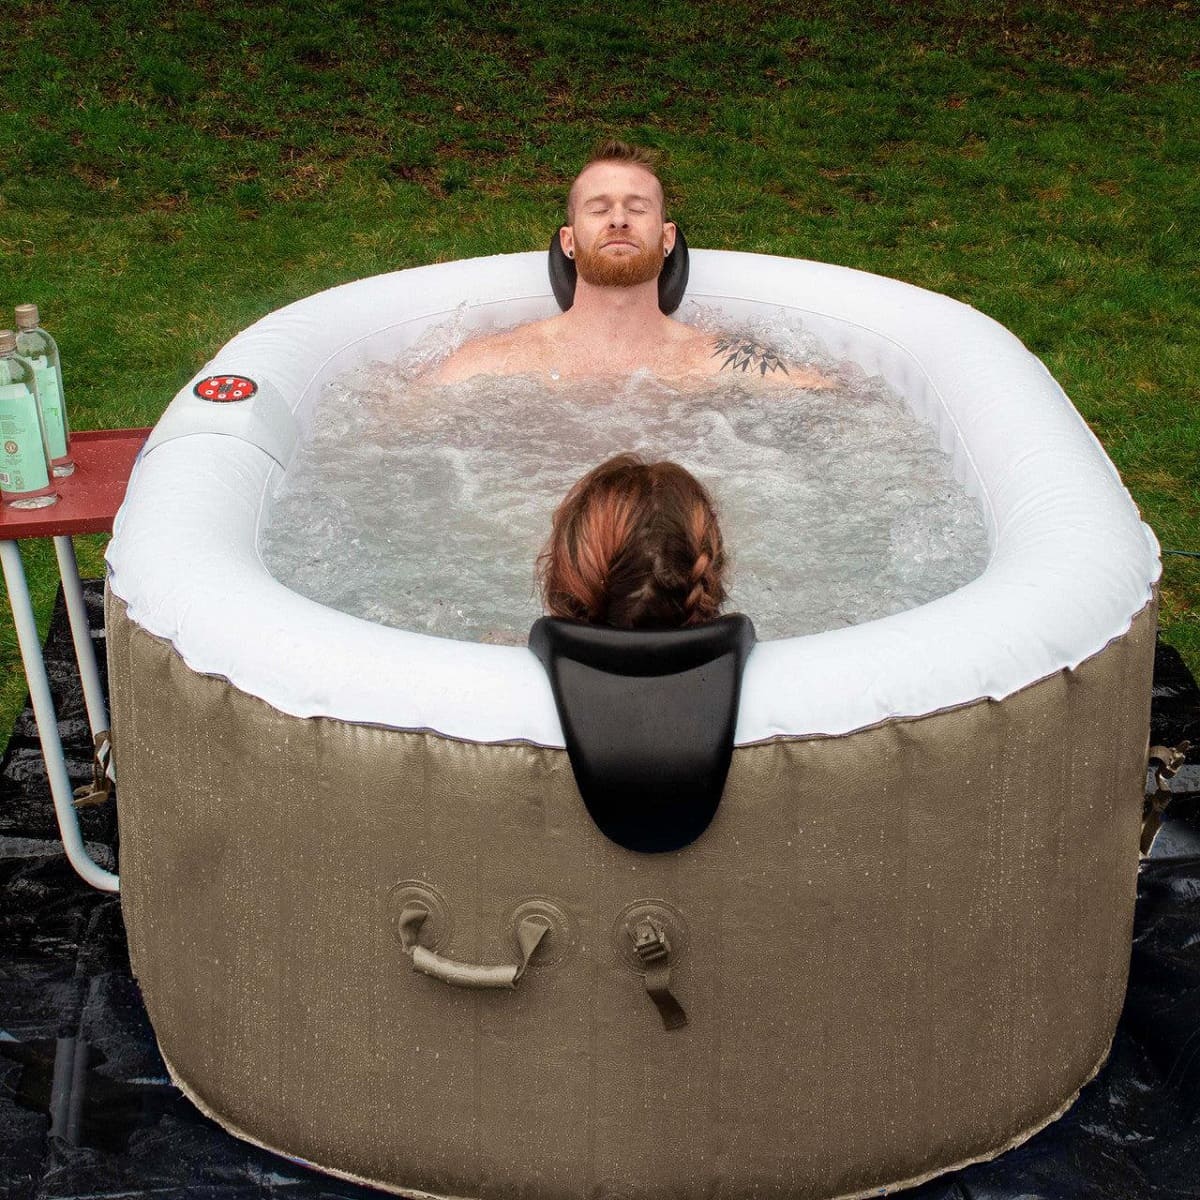 Best inflatable hot tubs 2023